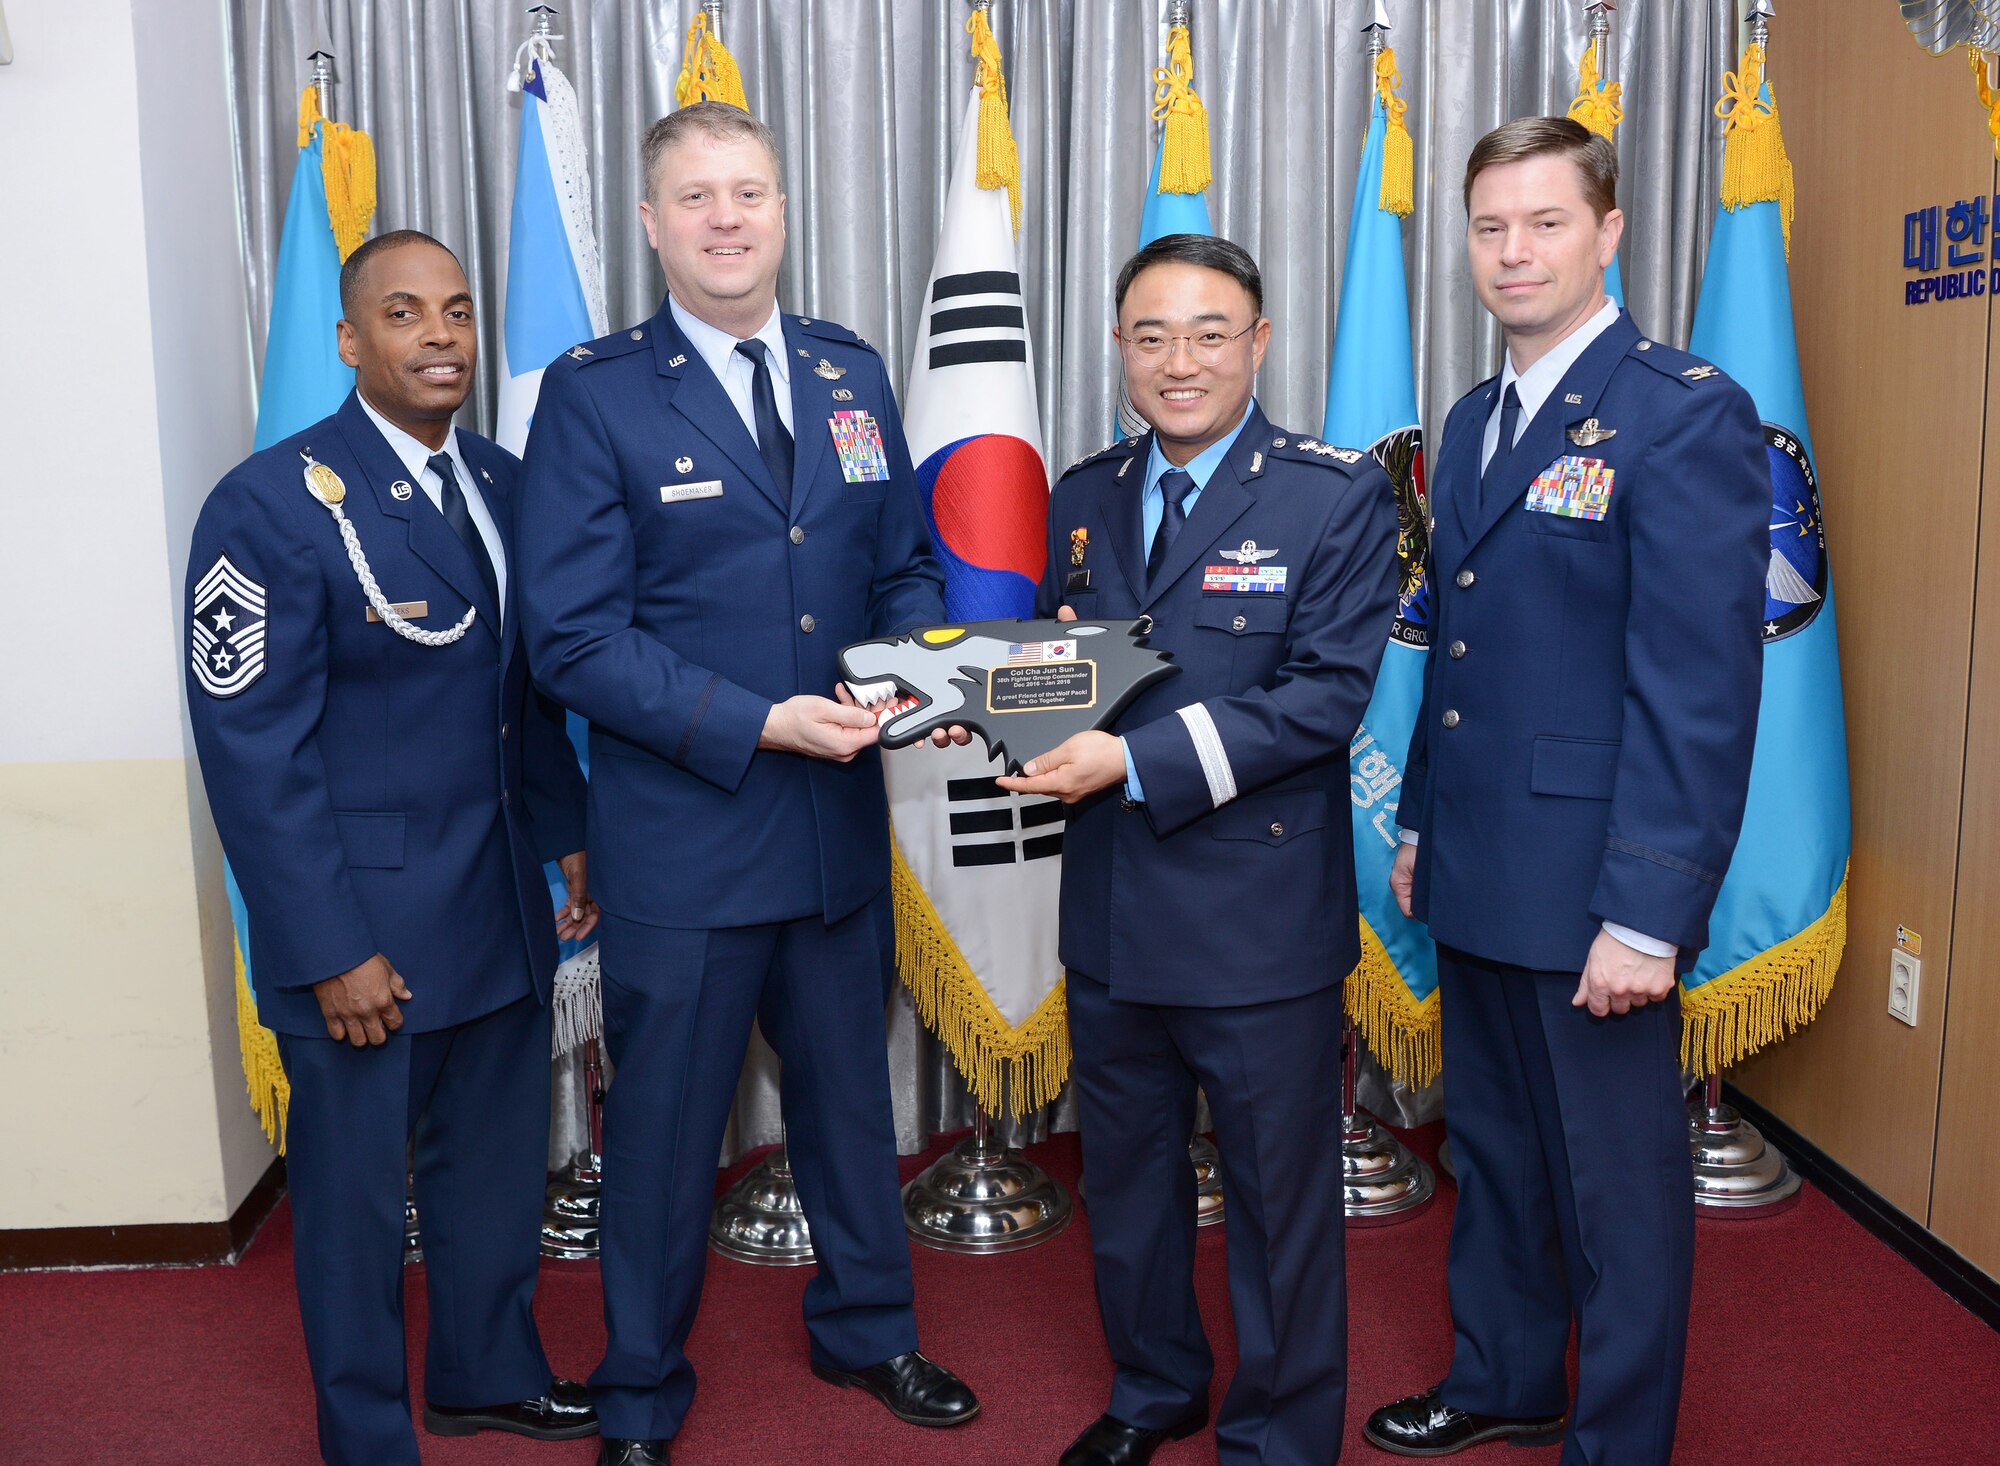 U.S. Air Force Col. David Shoemaker, 8th Fighter Wing commander, presents Republic of Korea Col. Jun-sun Cha, outgoing 38th Fighter Group commander “Thor”, with a parting gift following the change of command ceremony at Kunsan Air Base, RoK, Jan. 17, 2018.  Cha recognized the 8th FW in his farewell speech noting that “we are one team,” and the partnership between the two groups is something he will remember most. (Courtesy photo)